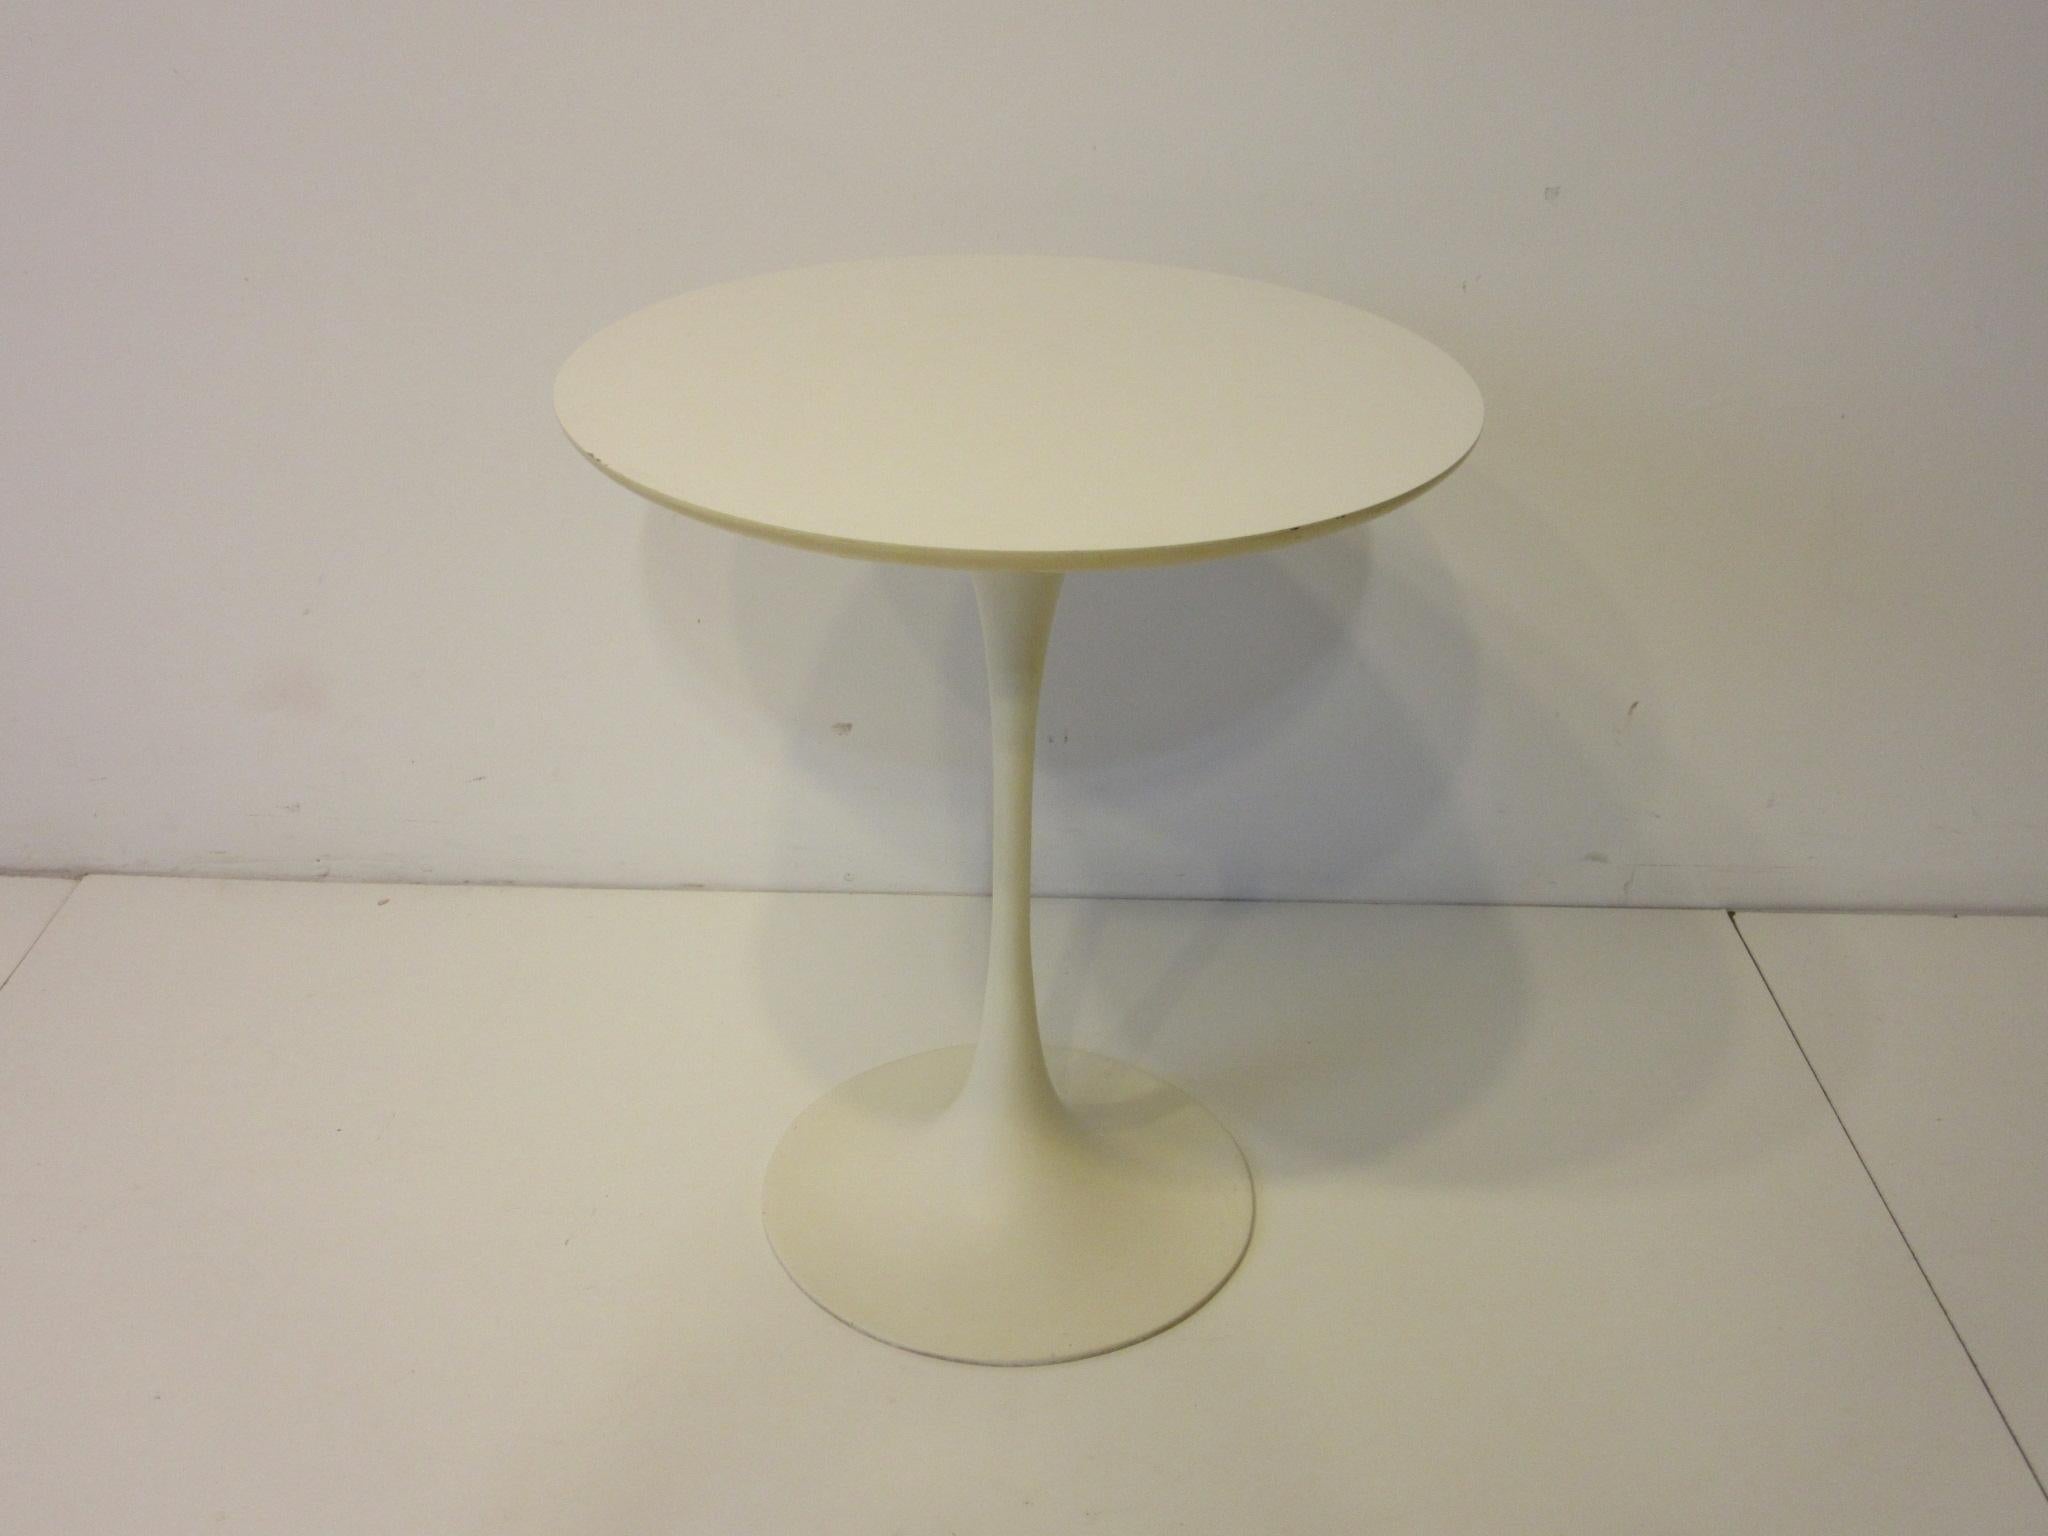 20th Century Tulip Pedestal Side Table in the Style of Saarinen by Maurice Burke